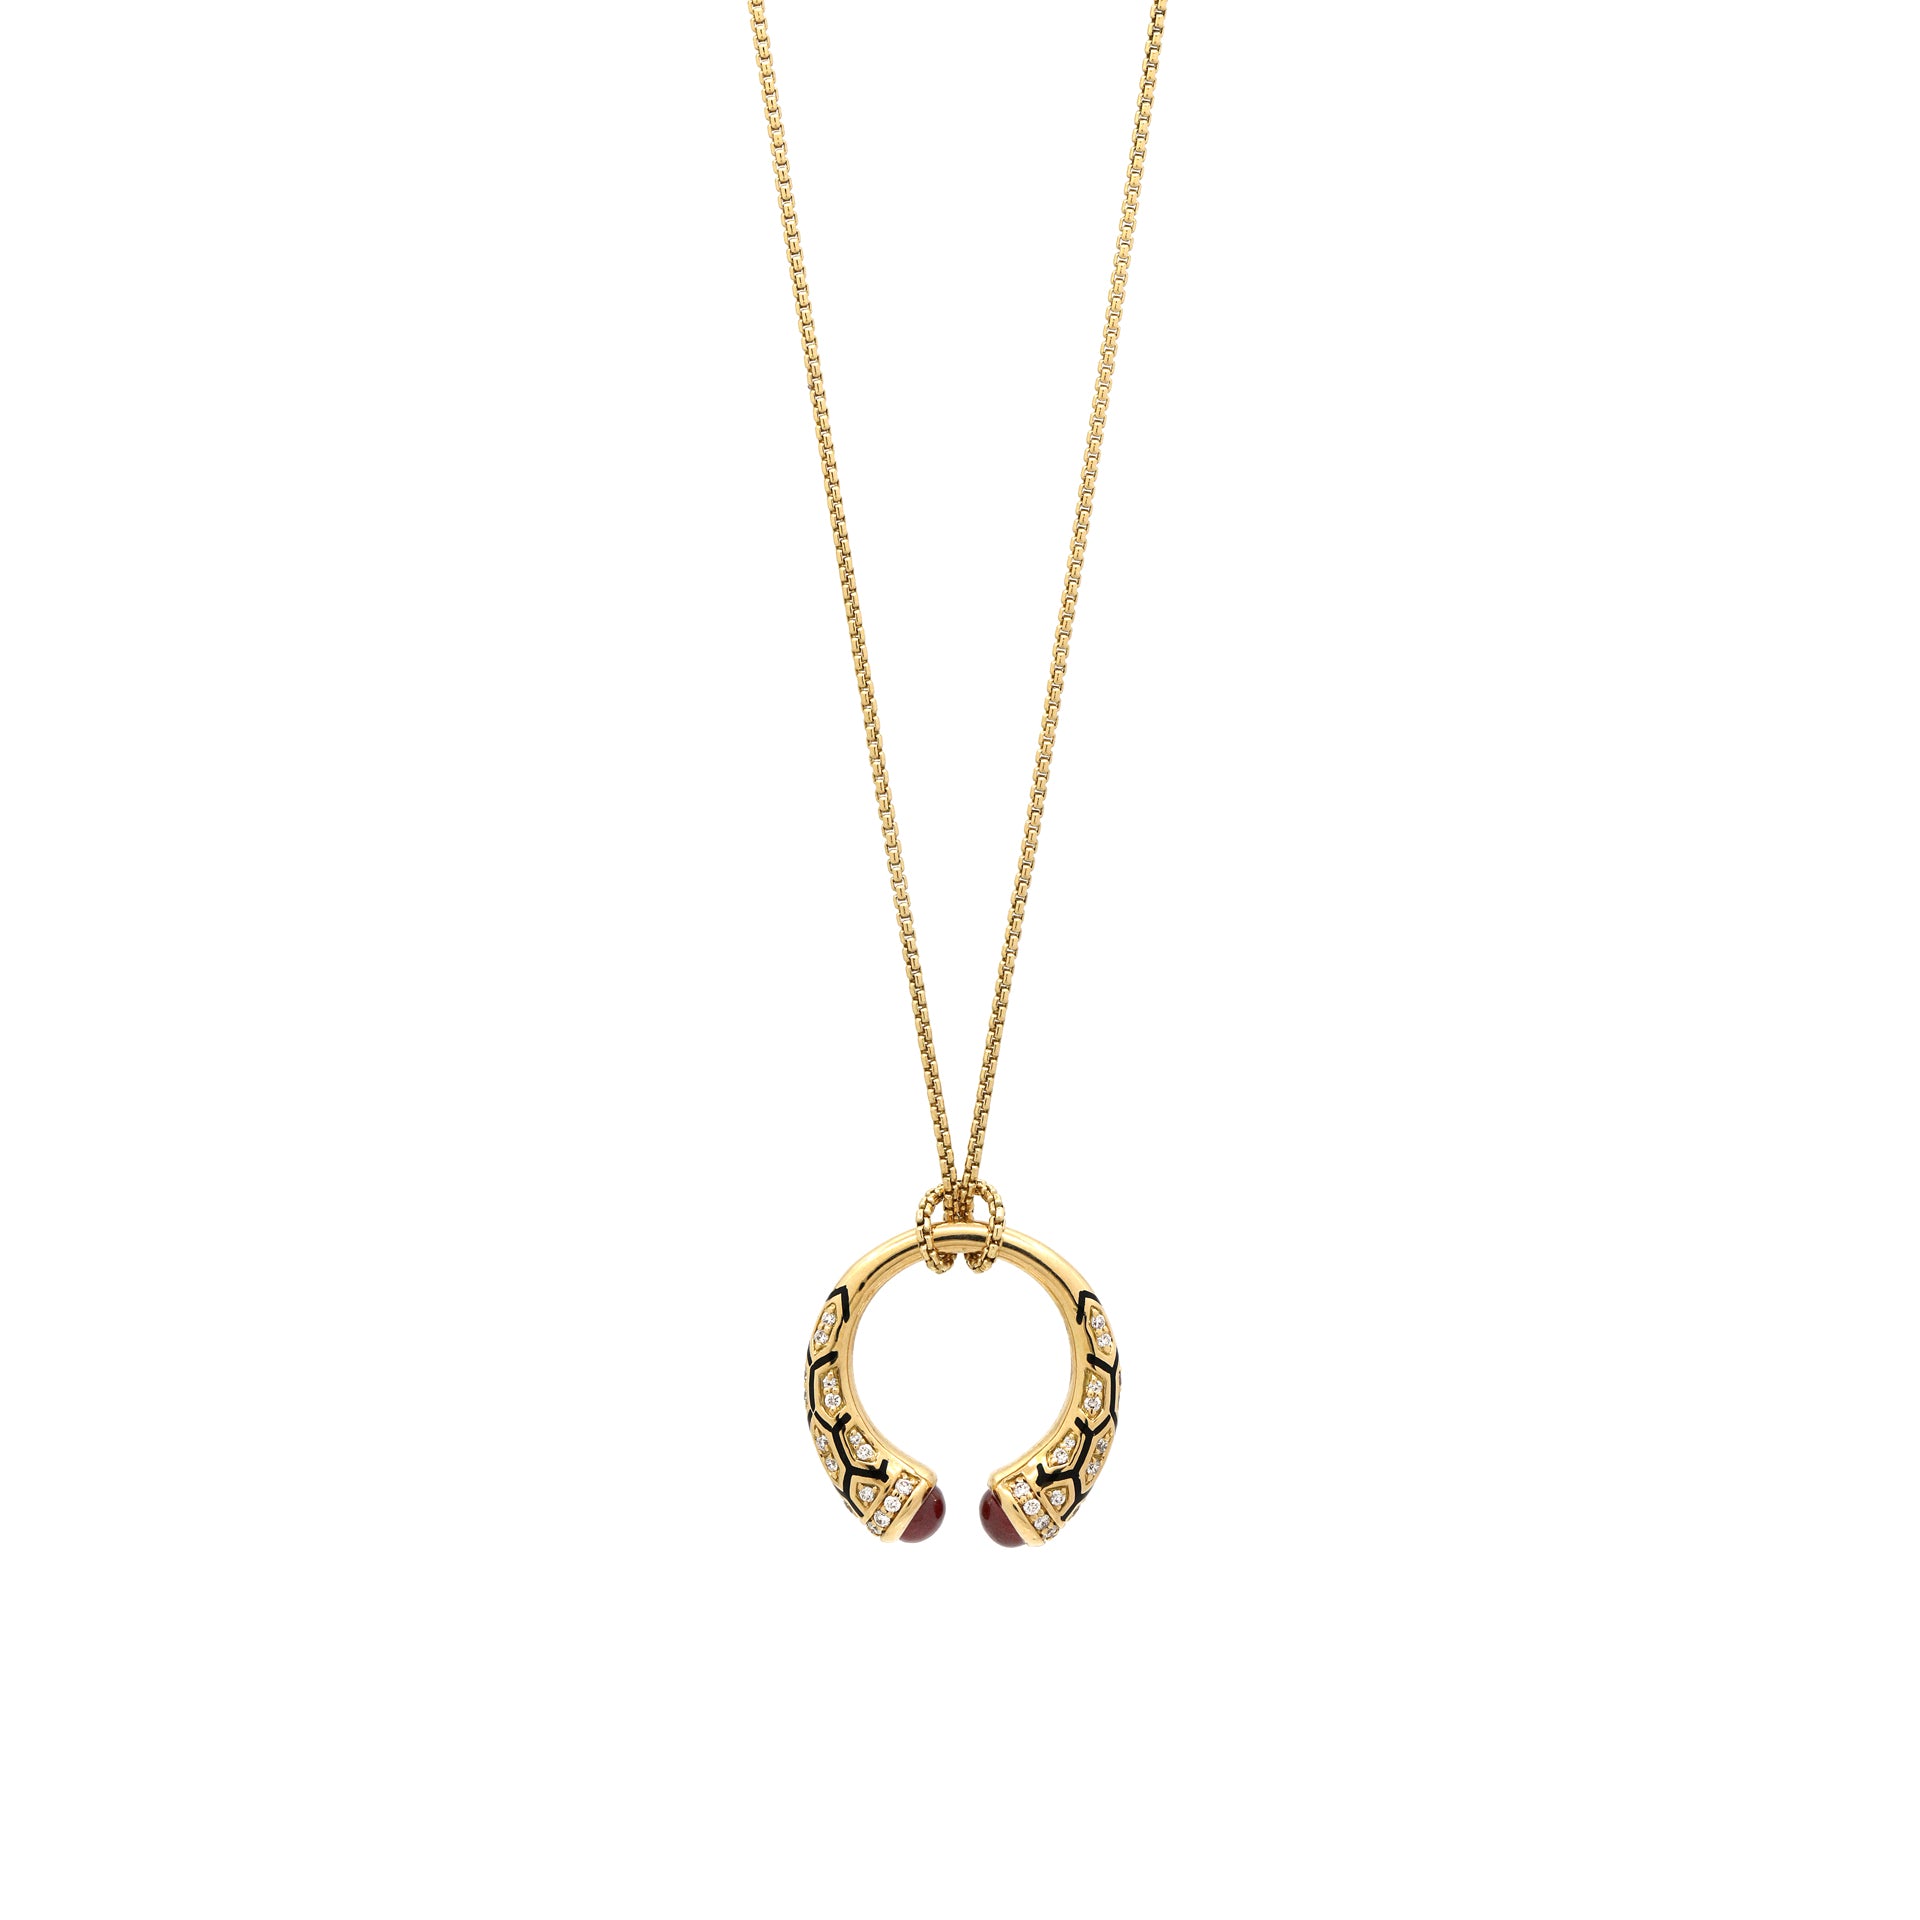 18k Mushabbak necklace in yellow gold with diamonds and rubies